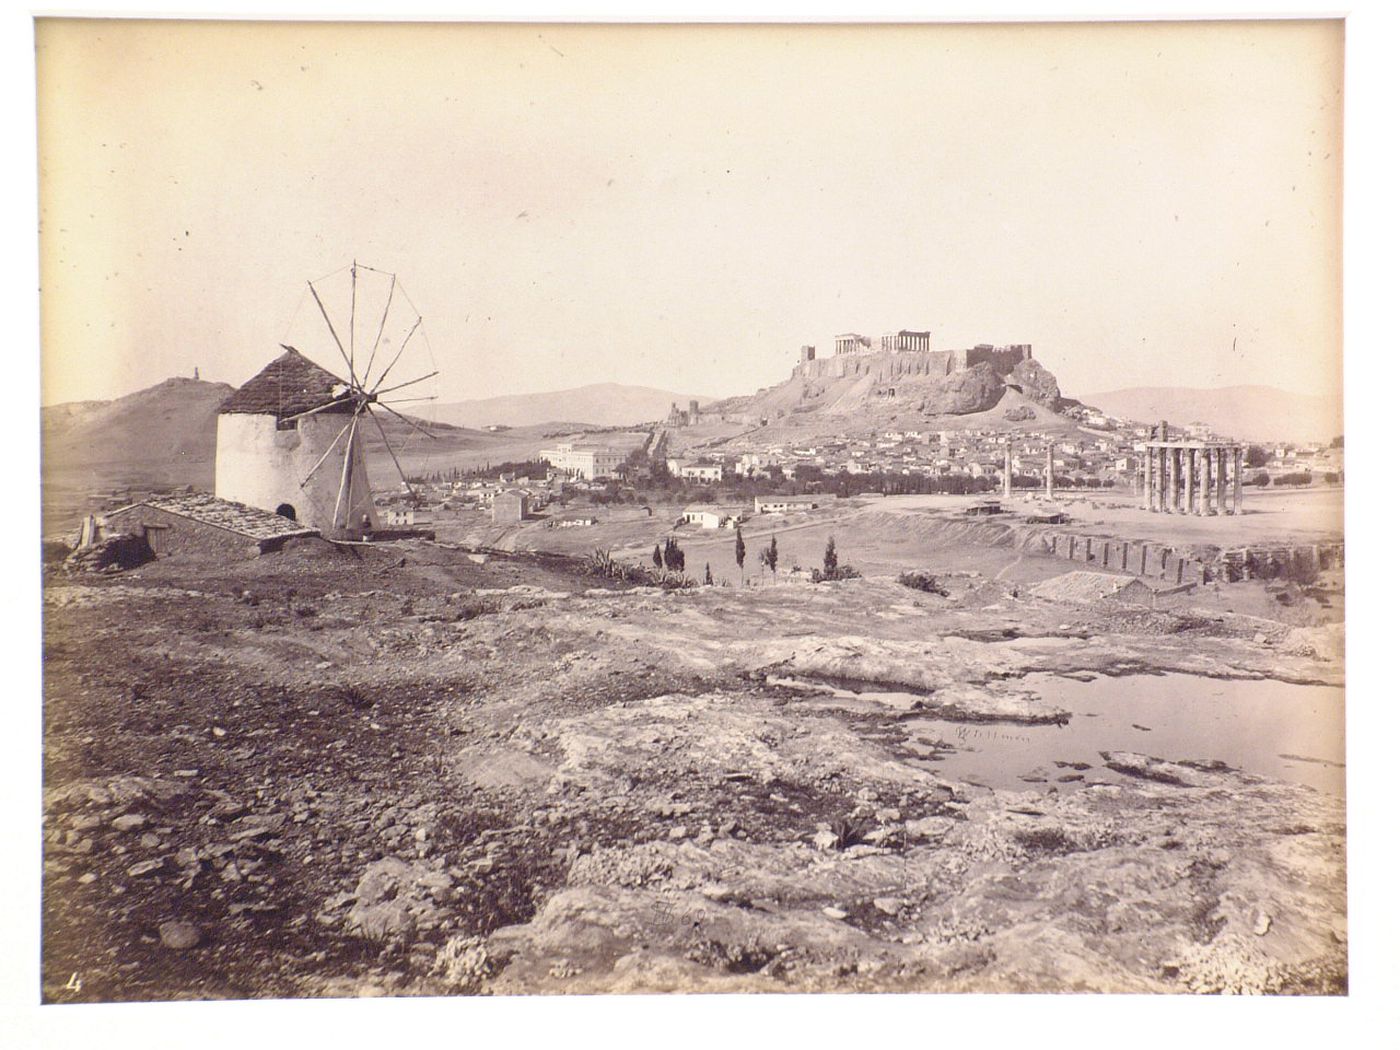 IV. The Acropolis from the Illyus. Ruins of the Temple of Jupiter Olympus in the middle distance.